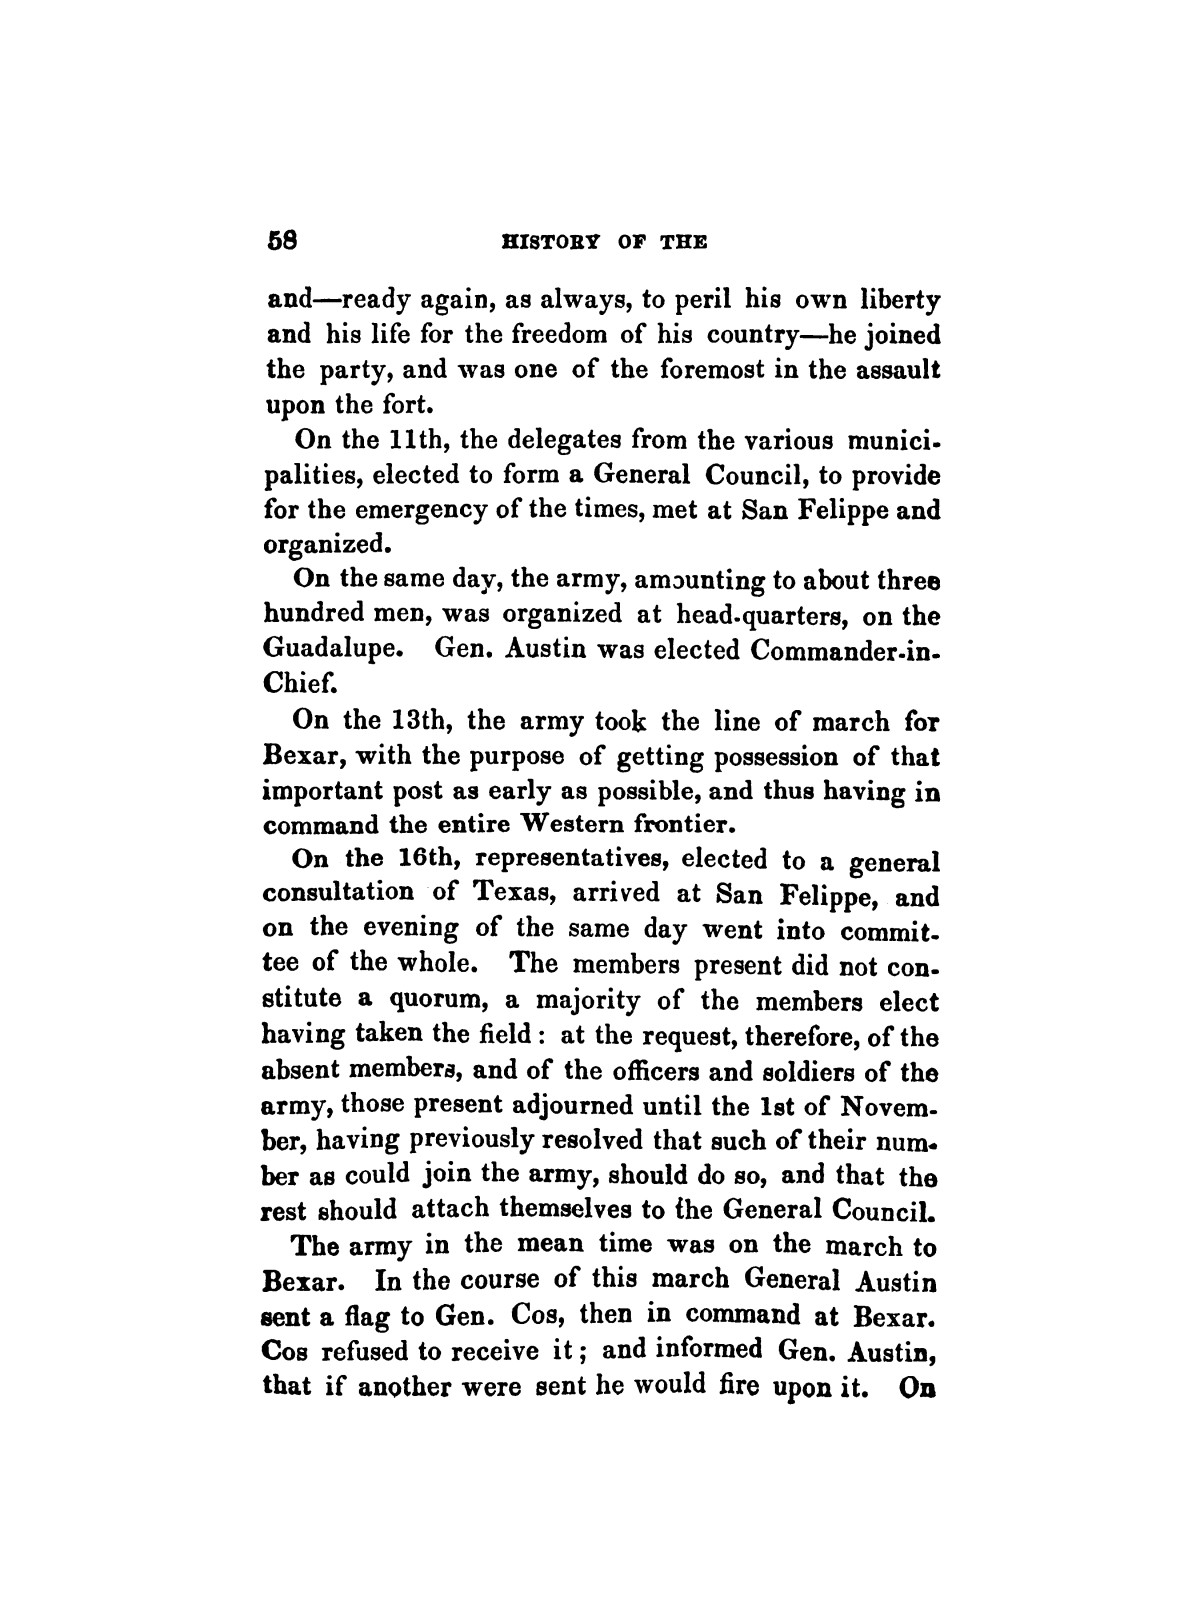 History of the Revolution in Texas, Particularly of the War of 1835 & '36; Together With the Latest Geographical, Topographical, and Statistical Accounts of the Country, From the Most Authentic Sources. Also, an Appendix.
                                                
                                                    [Sequence #]: 70 of 227
                                                